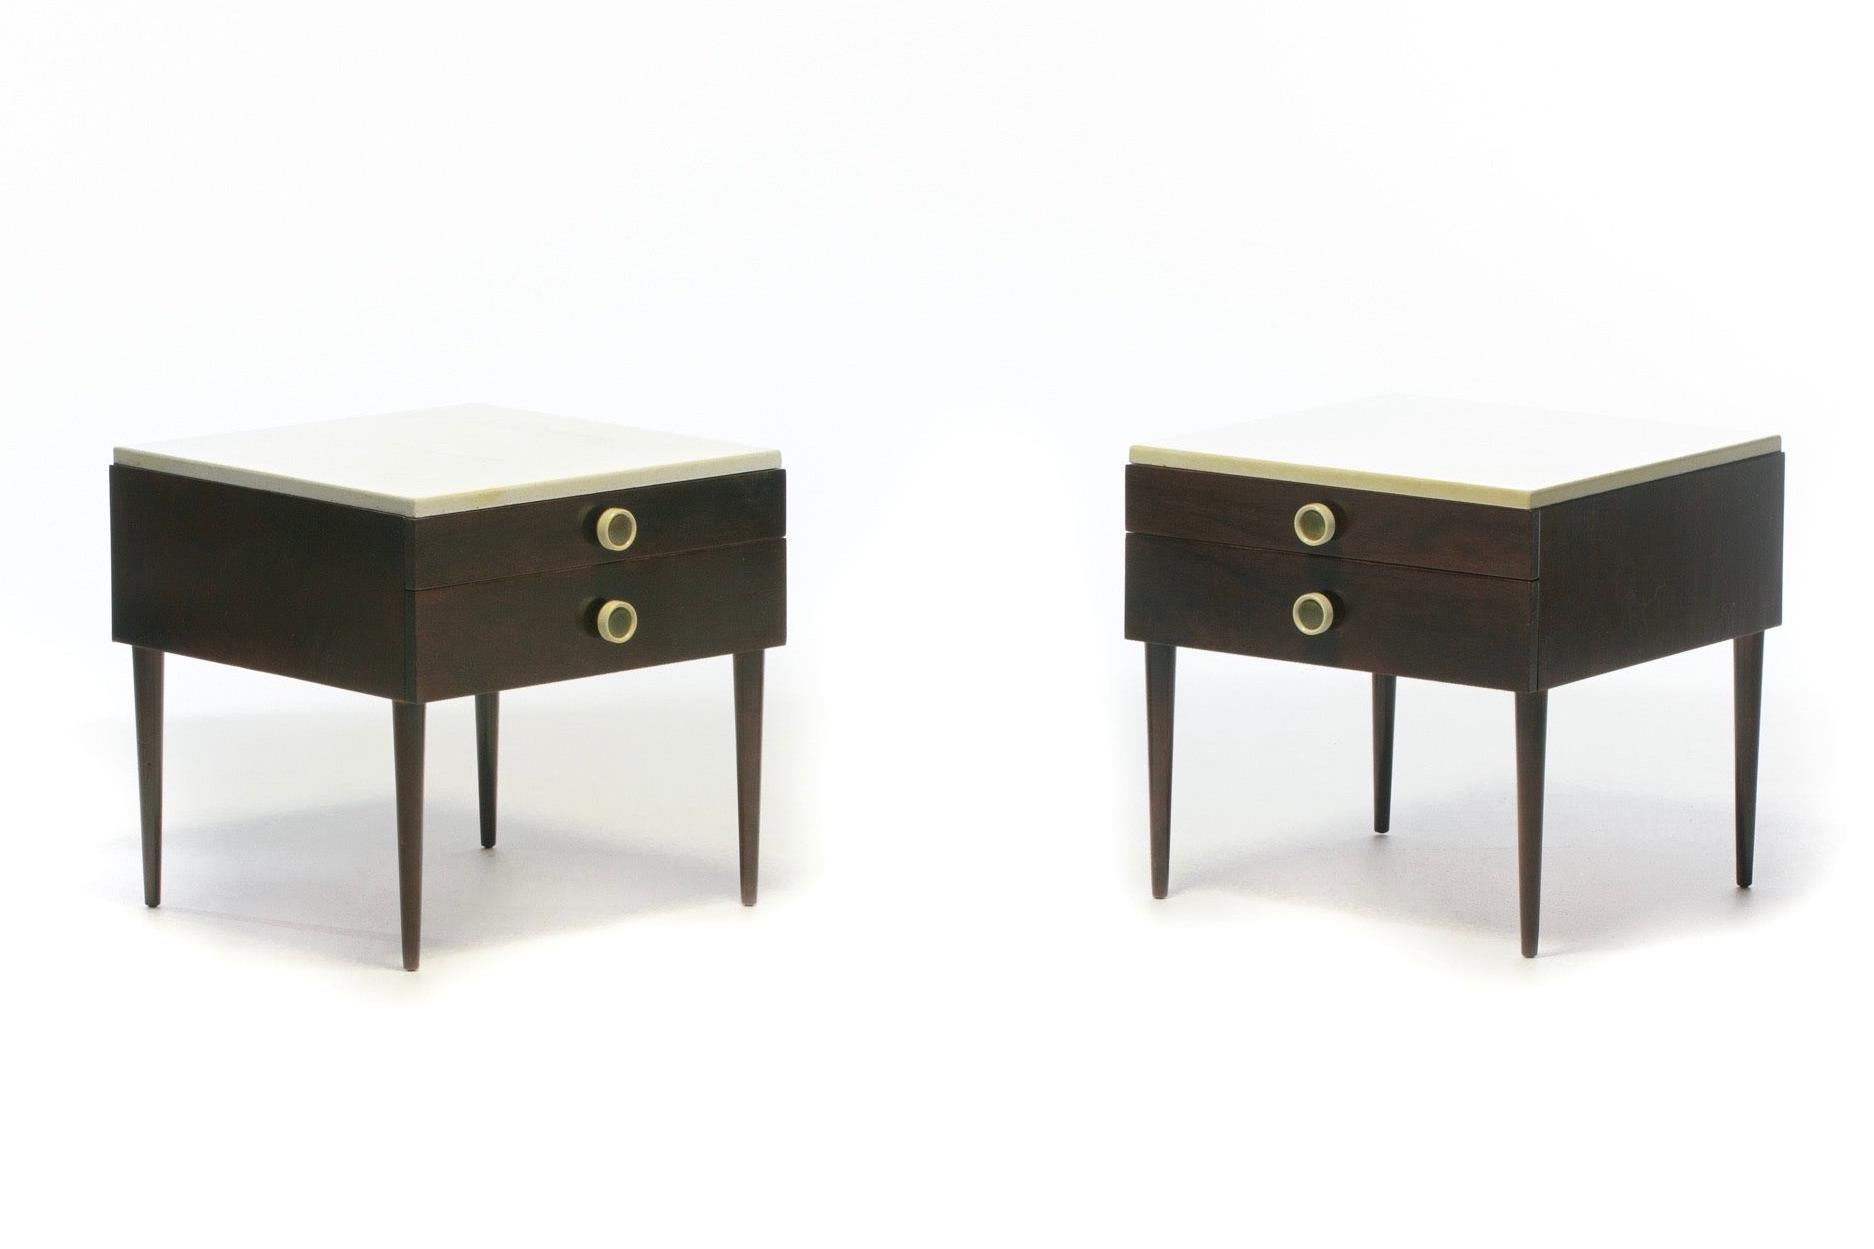 Mid-20th Century Pair of Paul Frankl Cork Top Nightstands or End Tables in Dark Walnut and Ivory For Sale